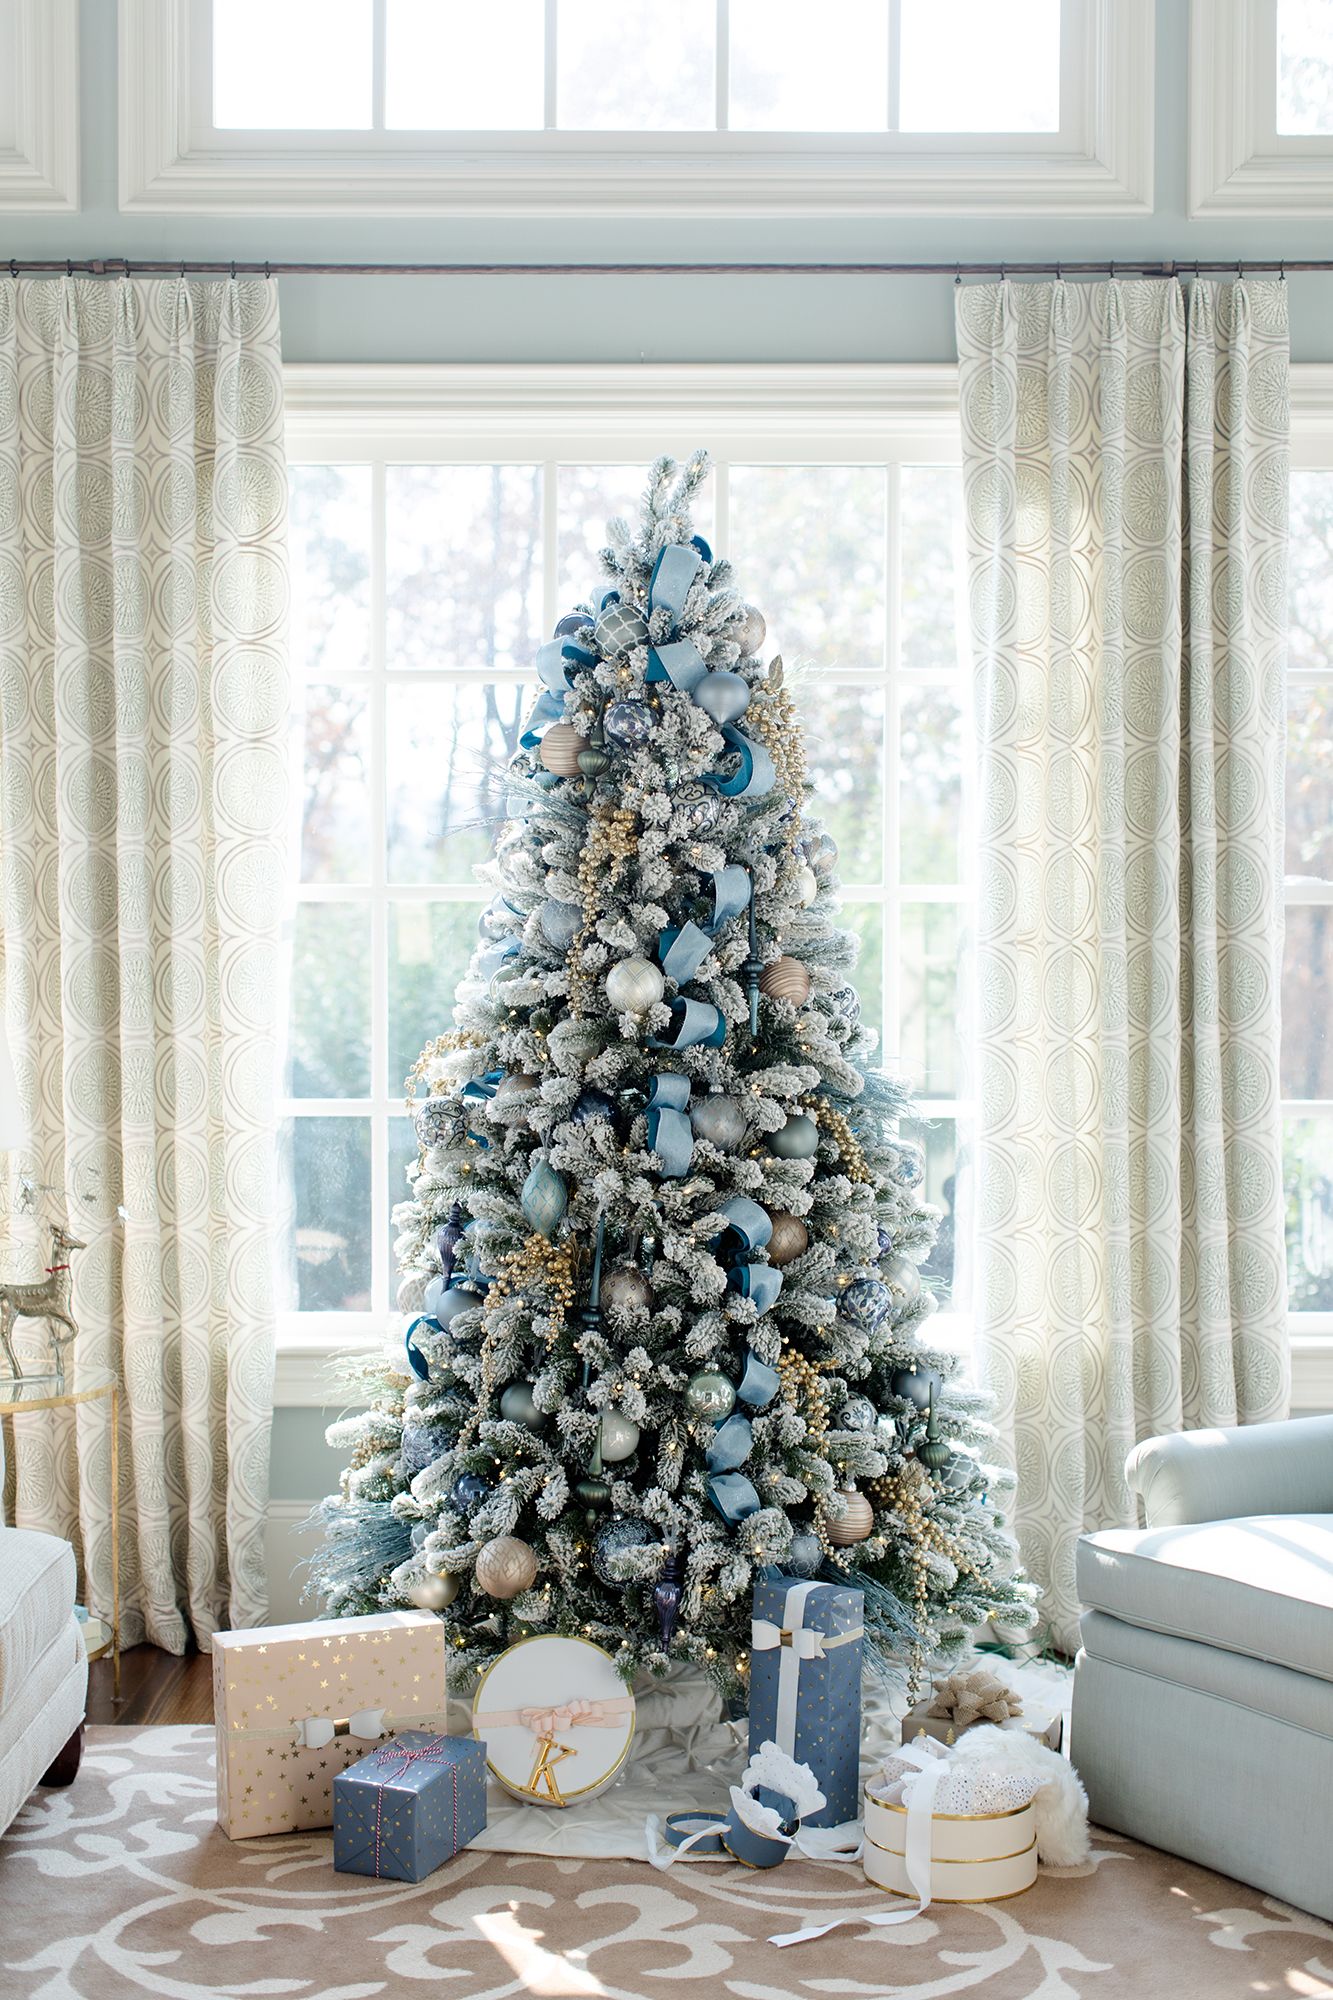 Brilliant Ways to Add Ribbon to Your Christmas Tree